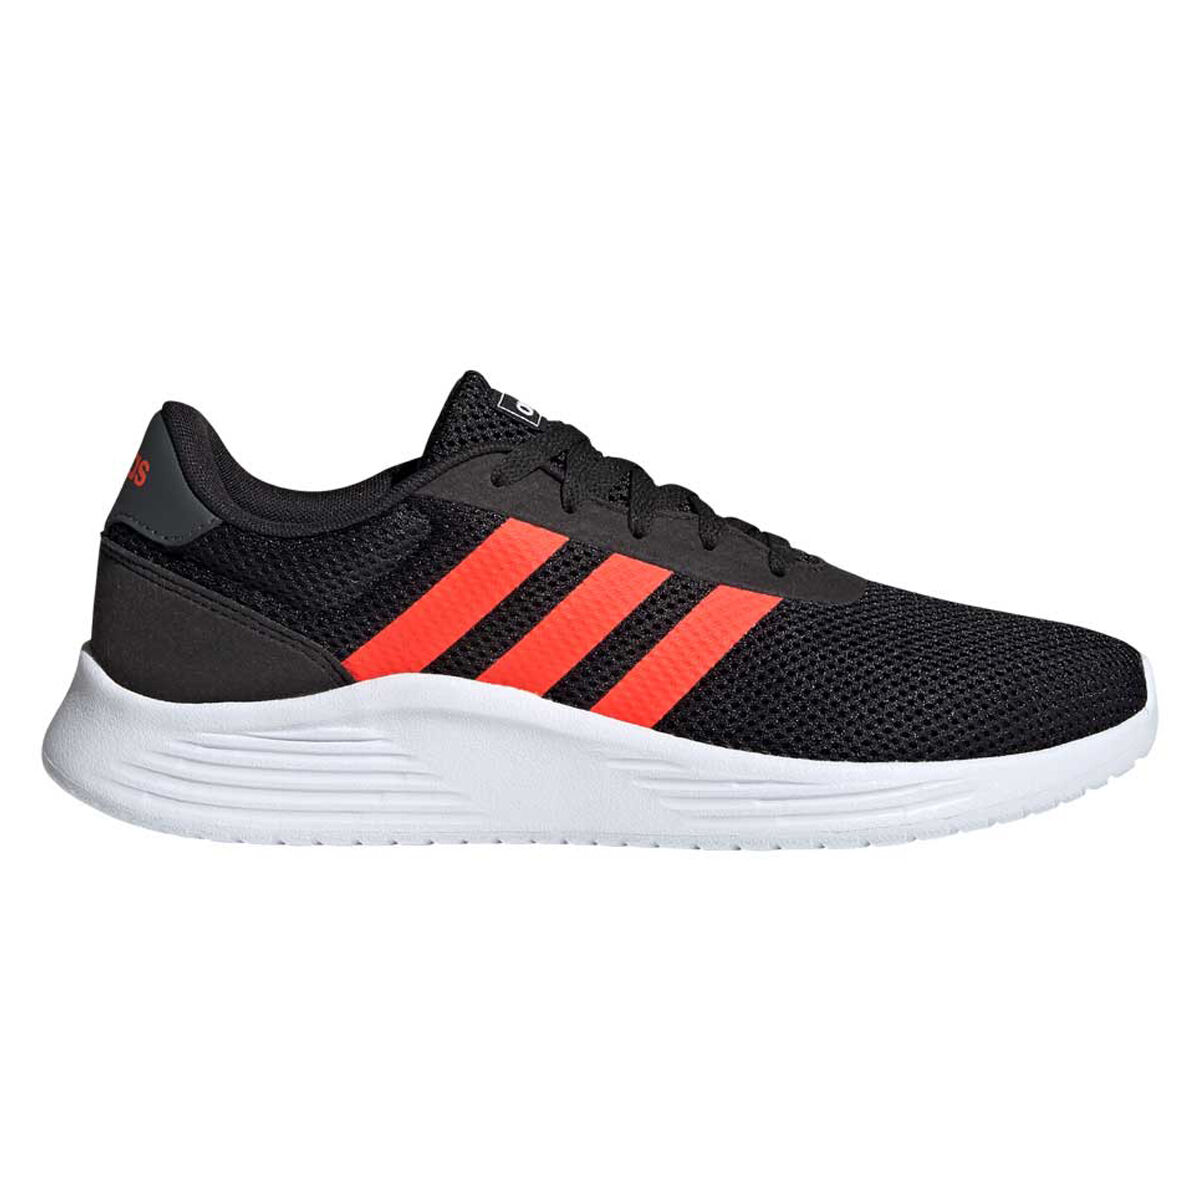 adidas men's casual shoes sneakers